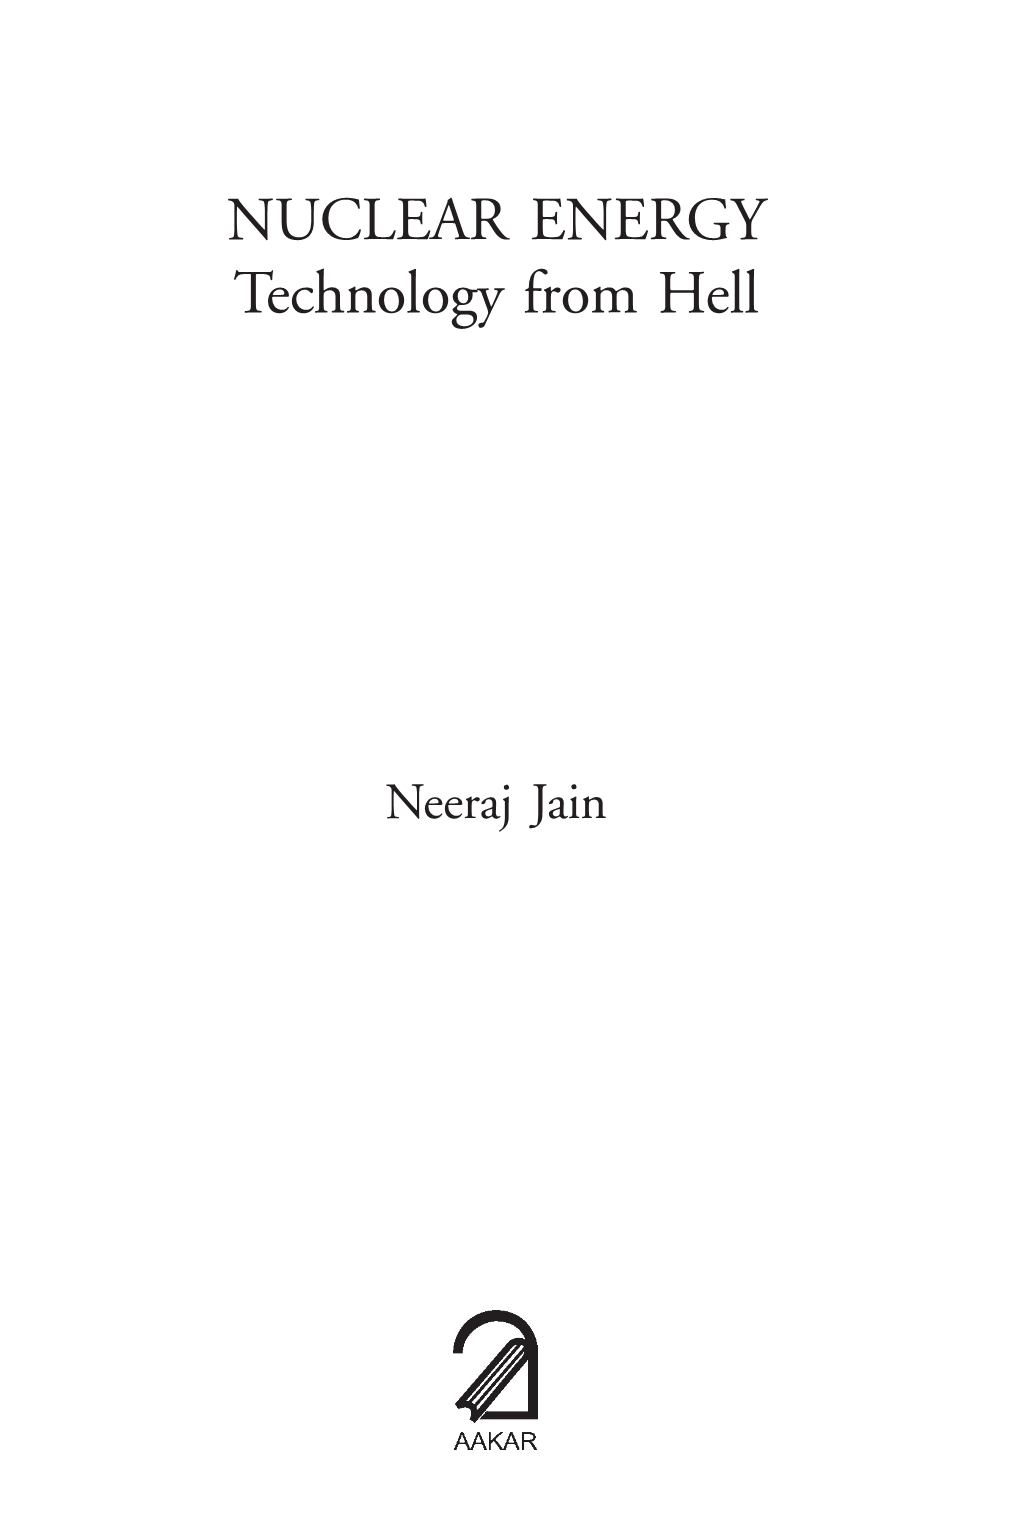 NUCLEAR ENERGY Technology from Hell